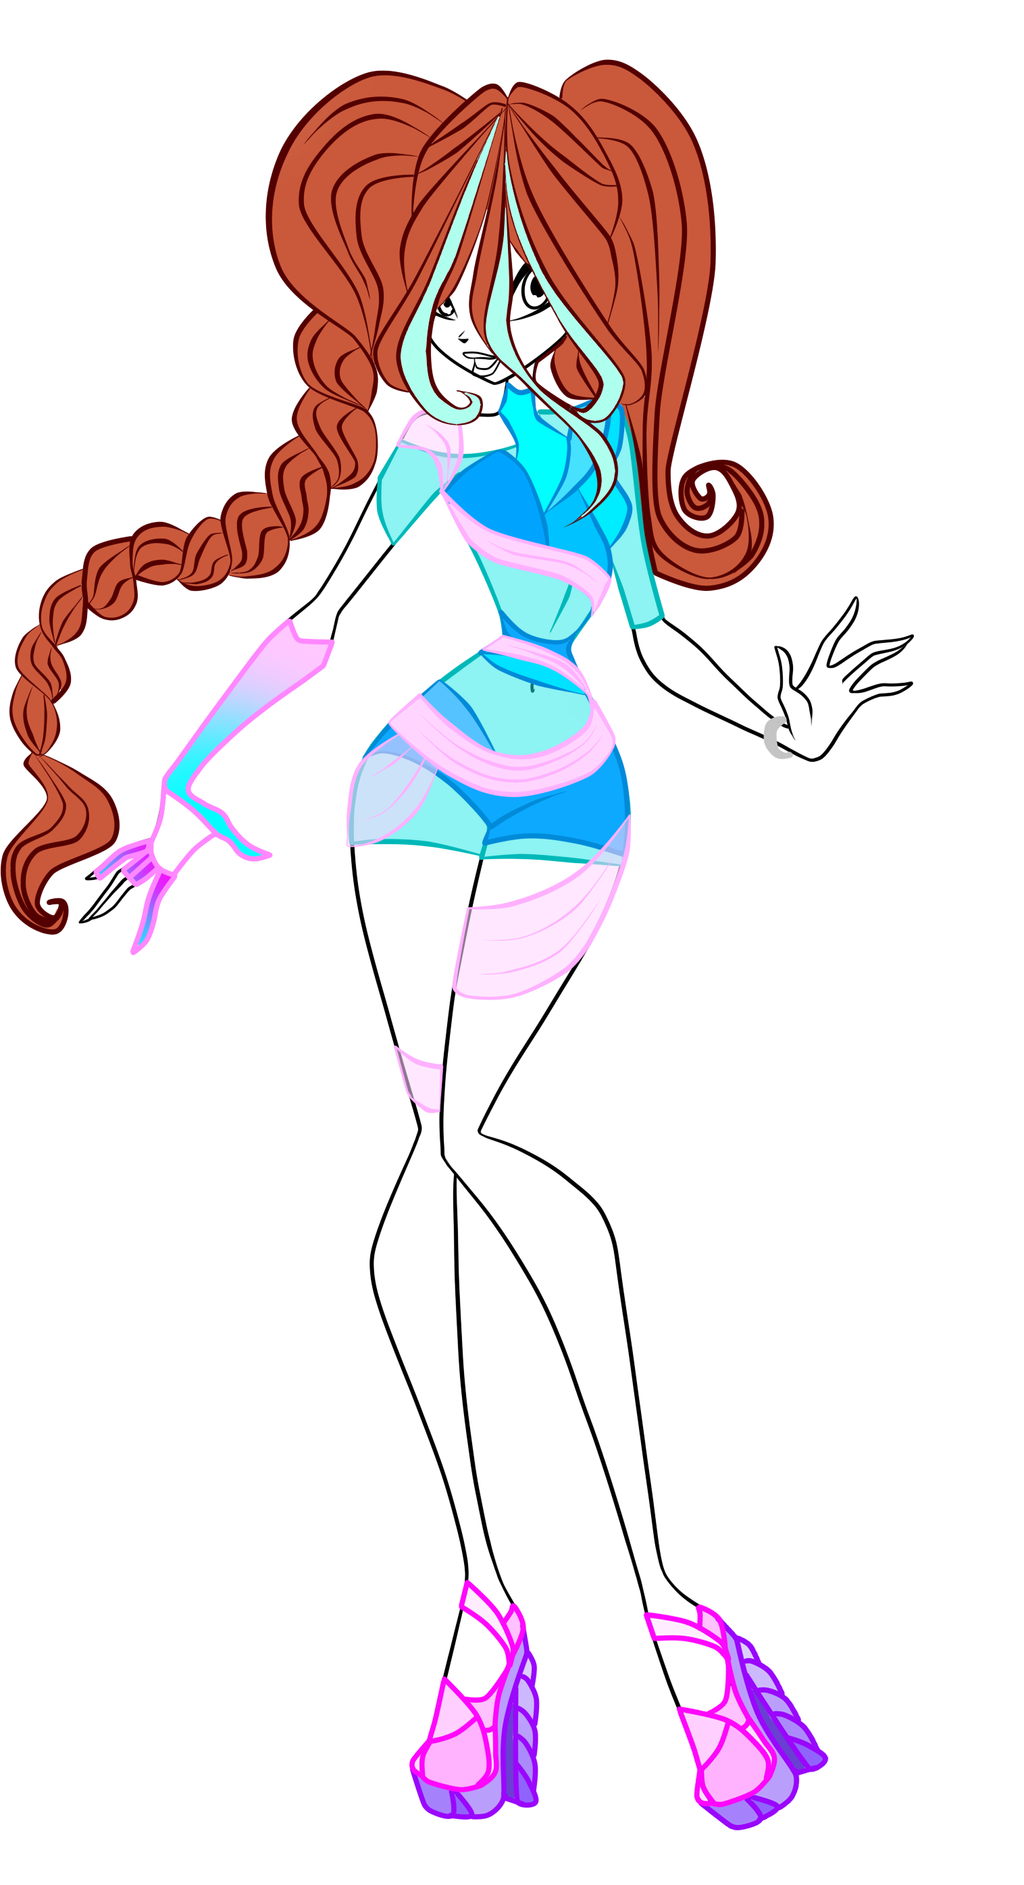 Winx new transformations by skxawng15 on DeviantArt